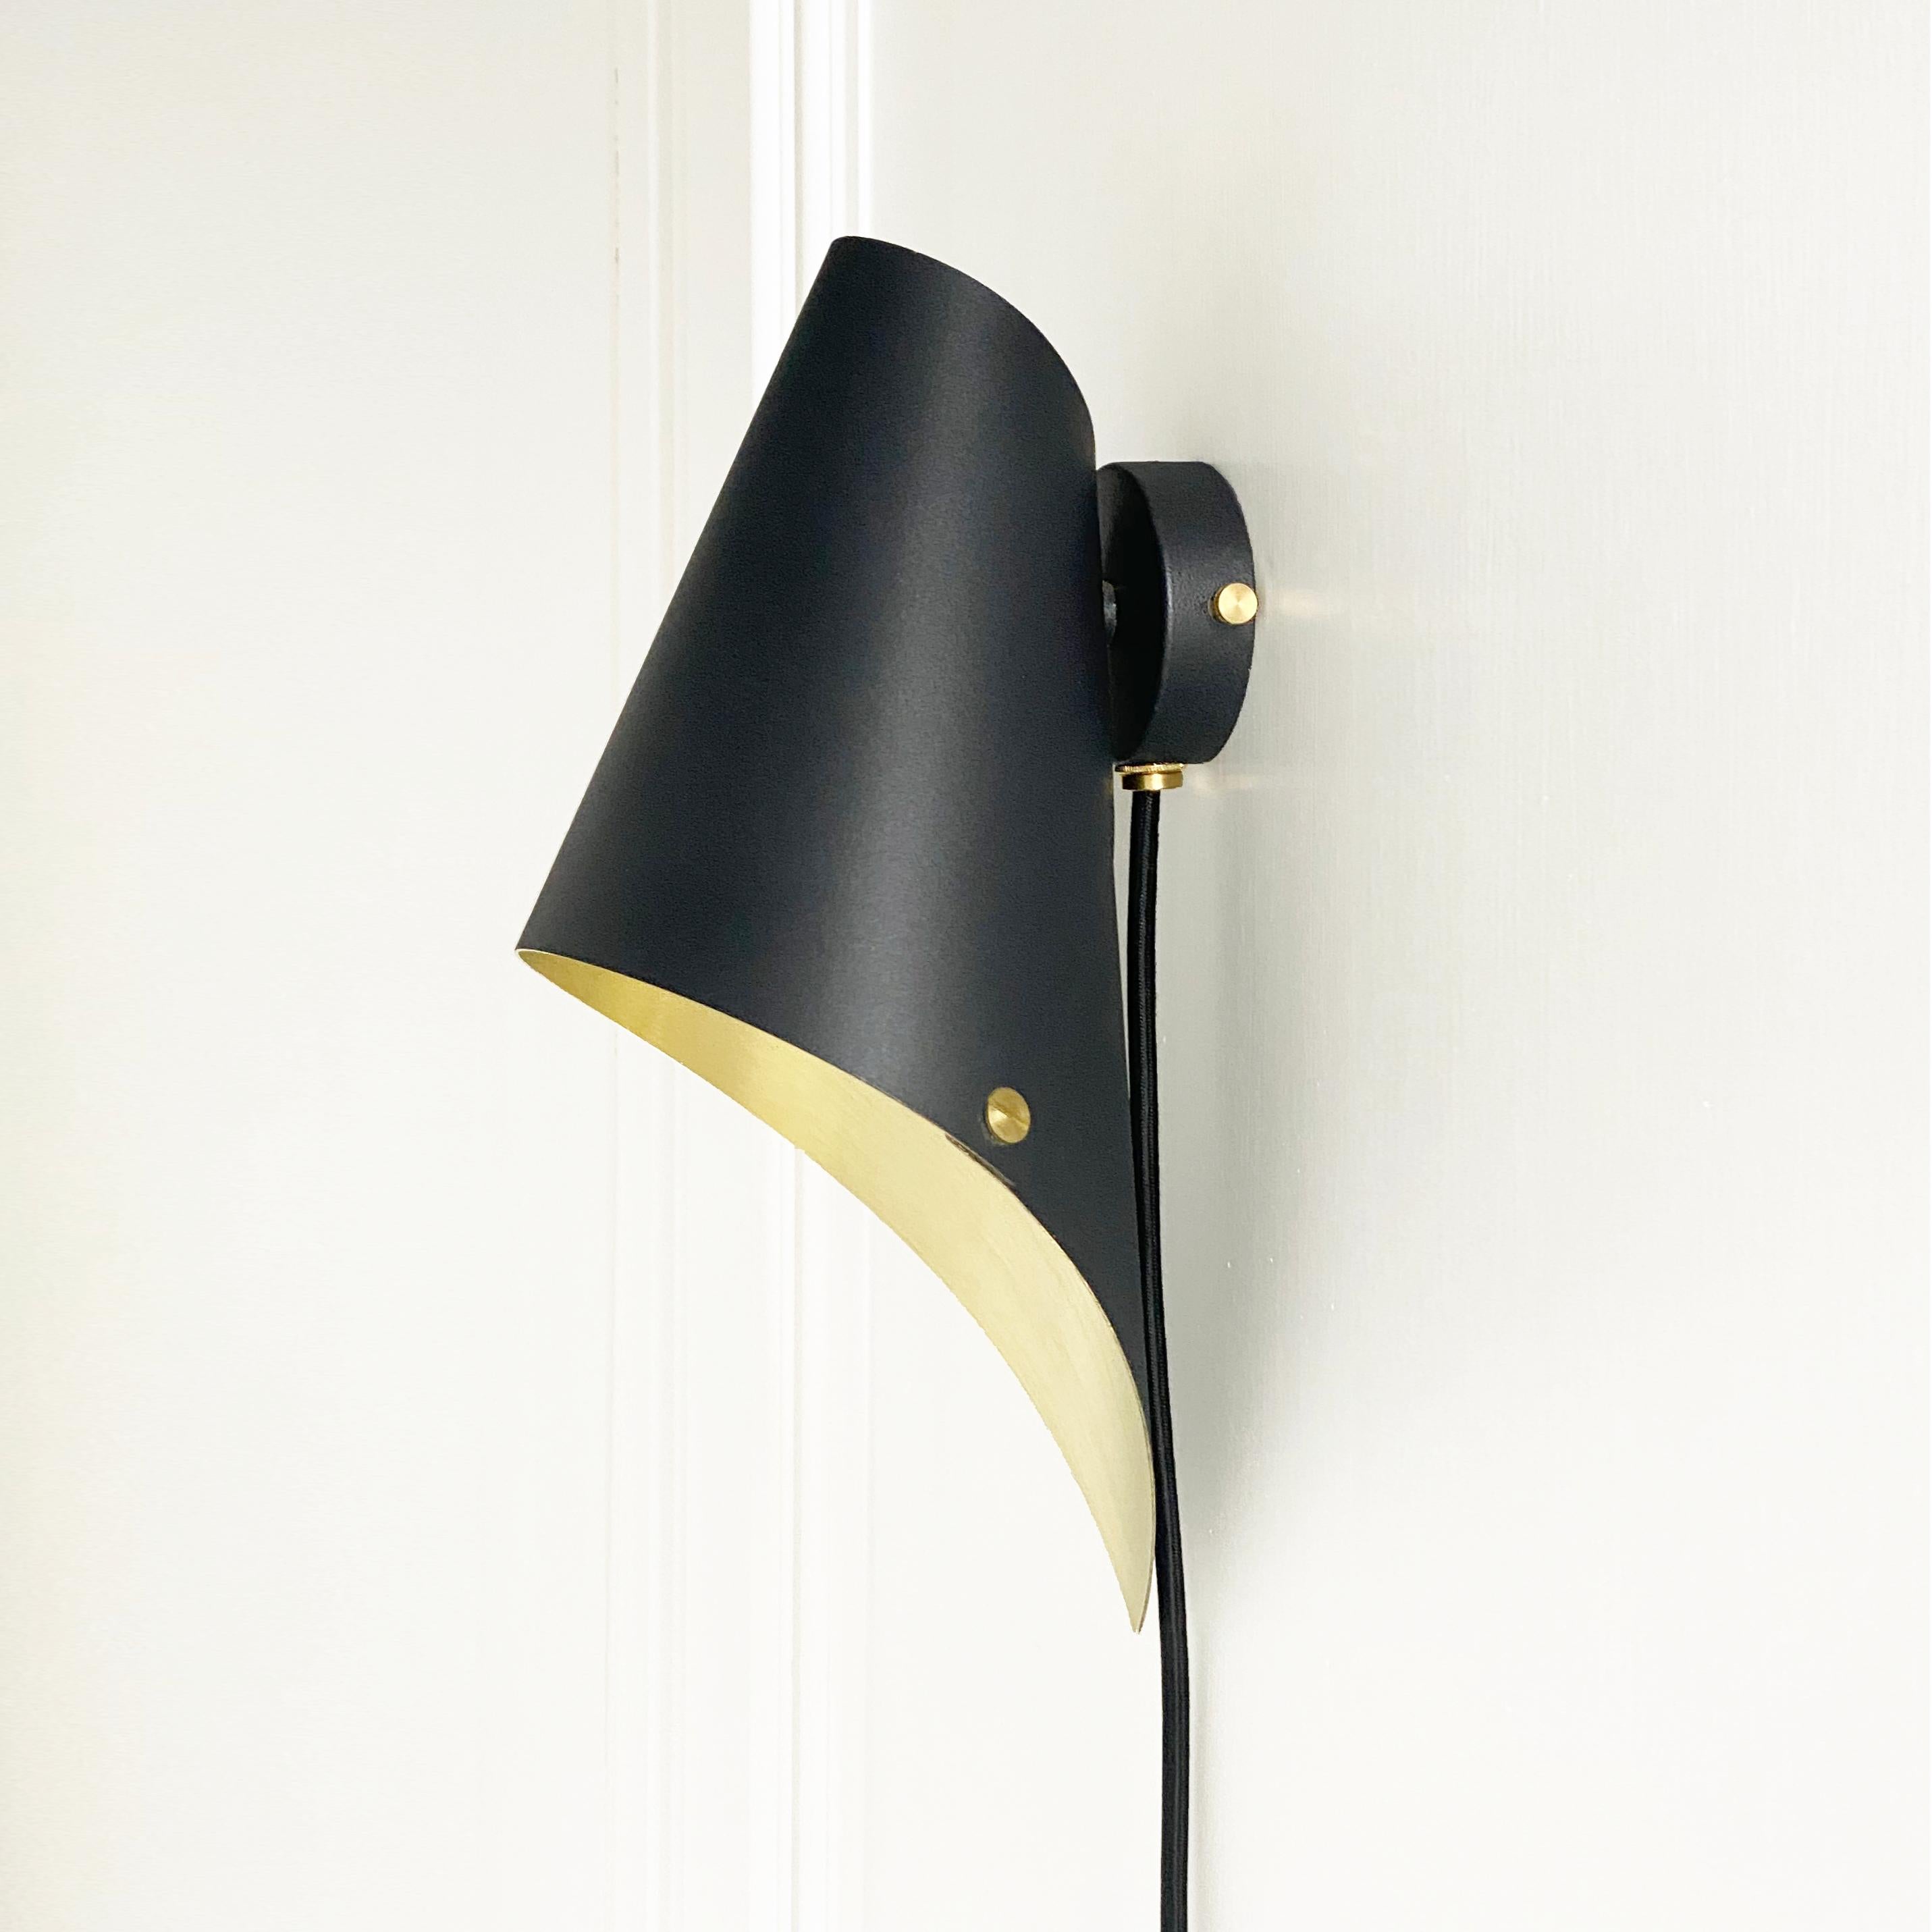 This beautiful brushed copper & matte white wall light is from our debut British lighting range.

Our contemporary wall lights are perfect for bathing your home in beautiful light, maybe above your favourite chair or beside your bedside for